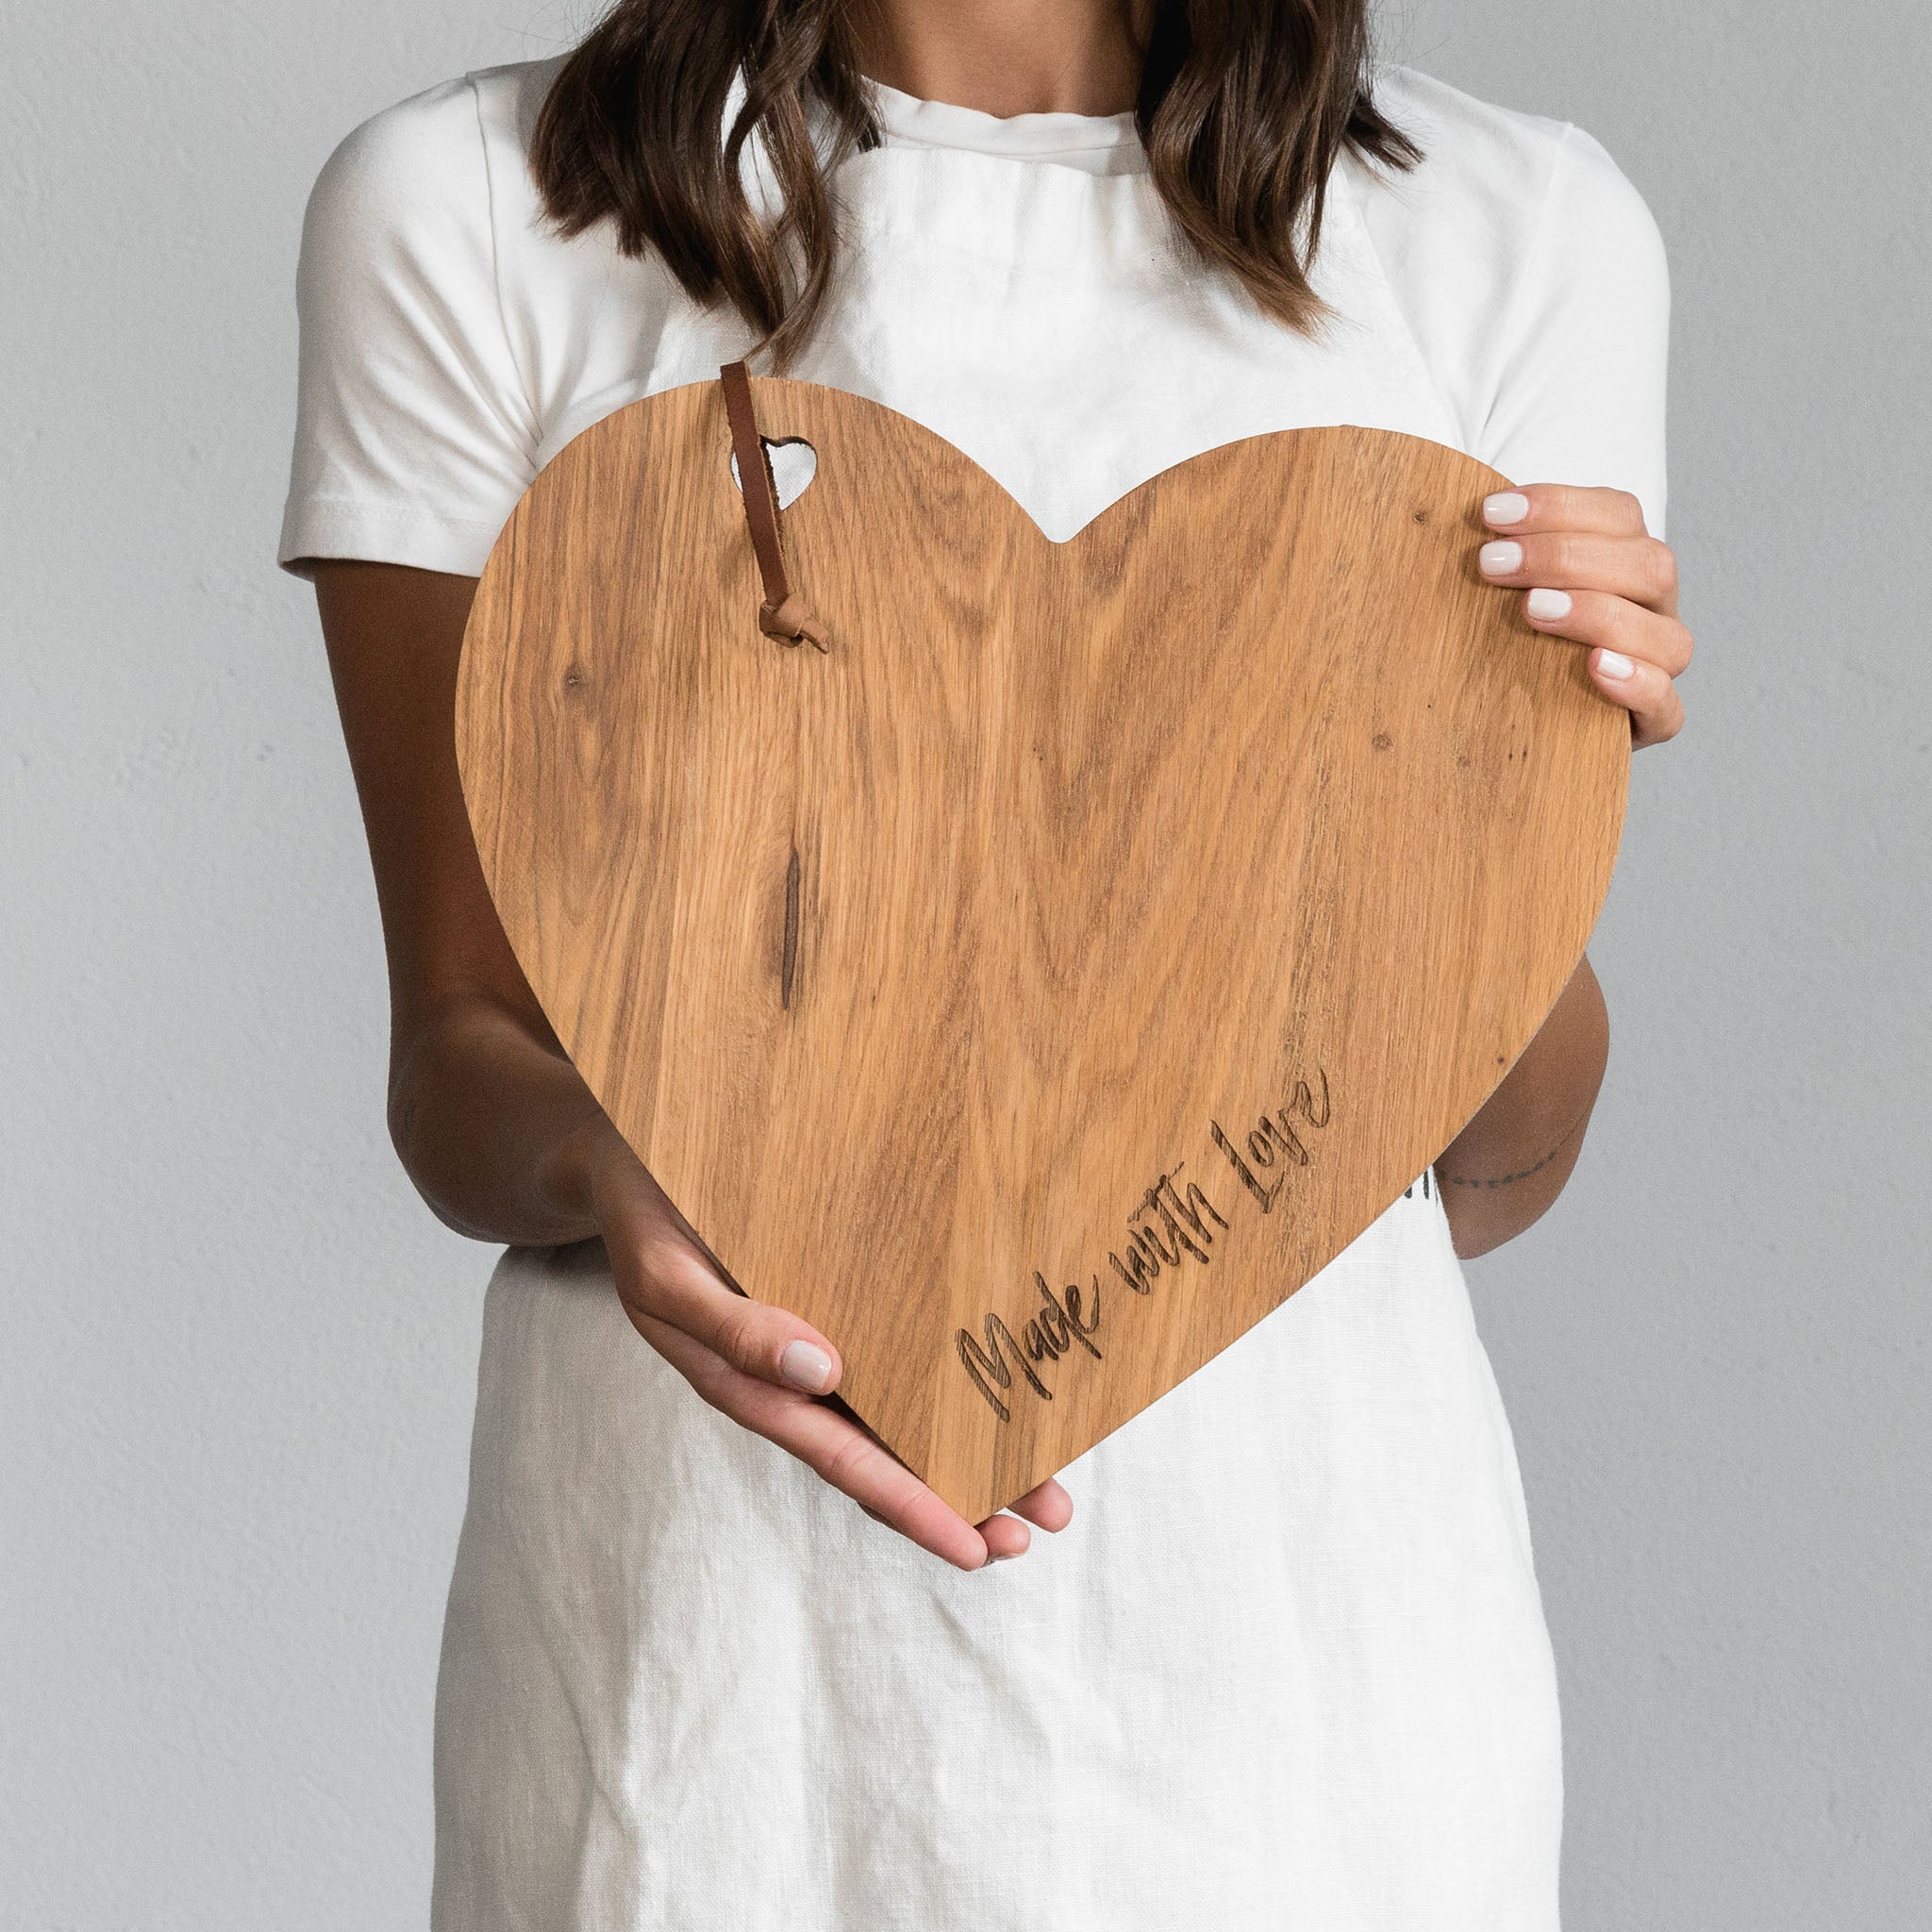 Made With Love heart-shaped cutting board